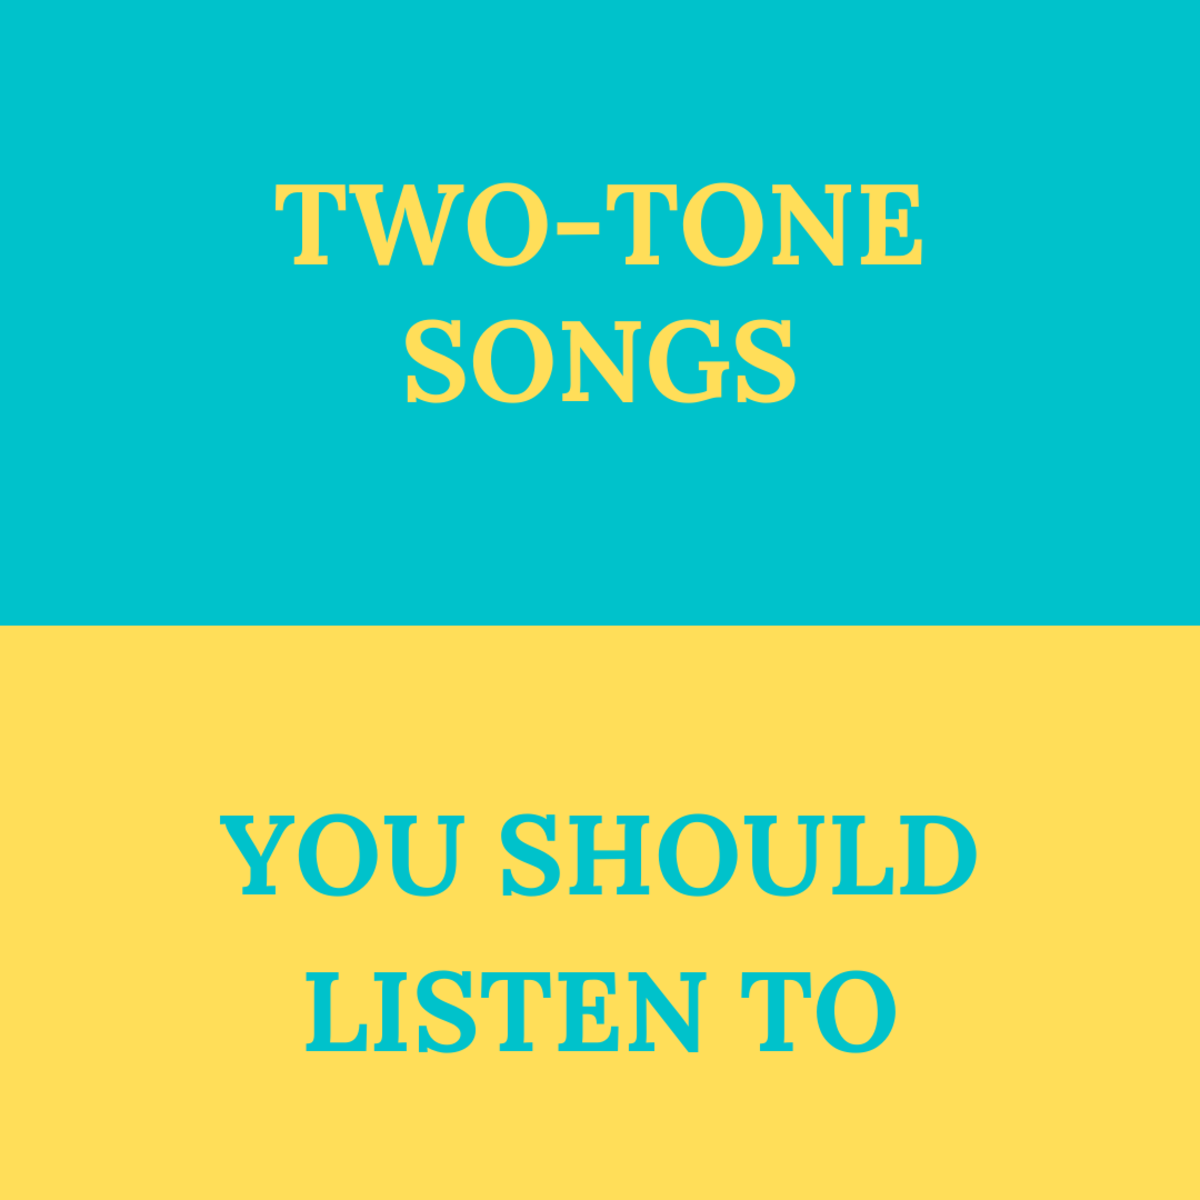 Interested in learning more about two-tone music? Read on to discover 10 great examples you should listen to!